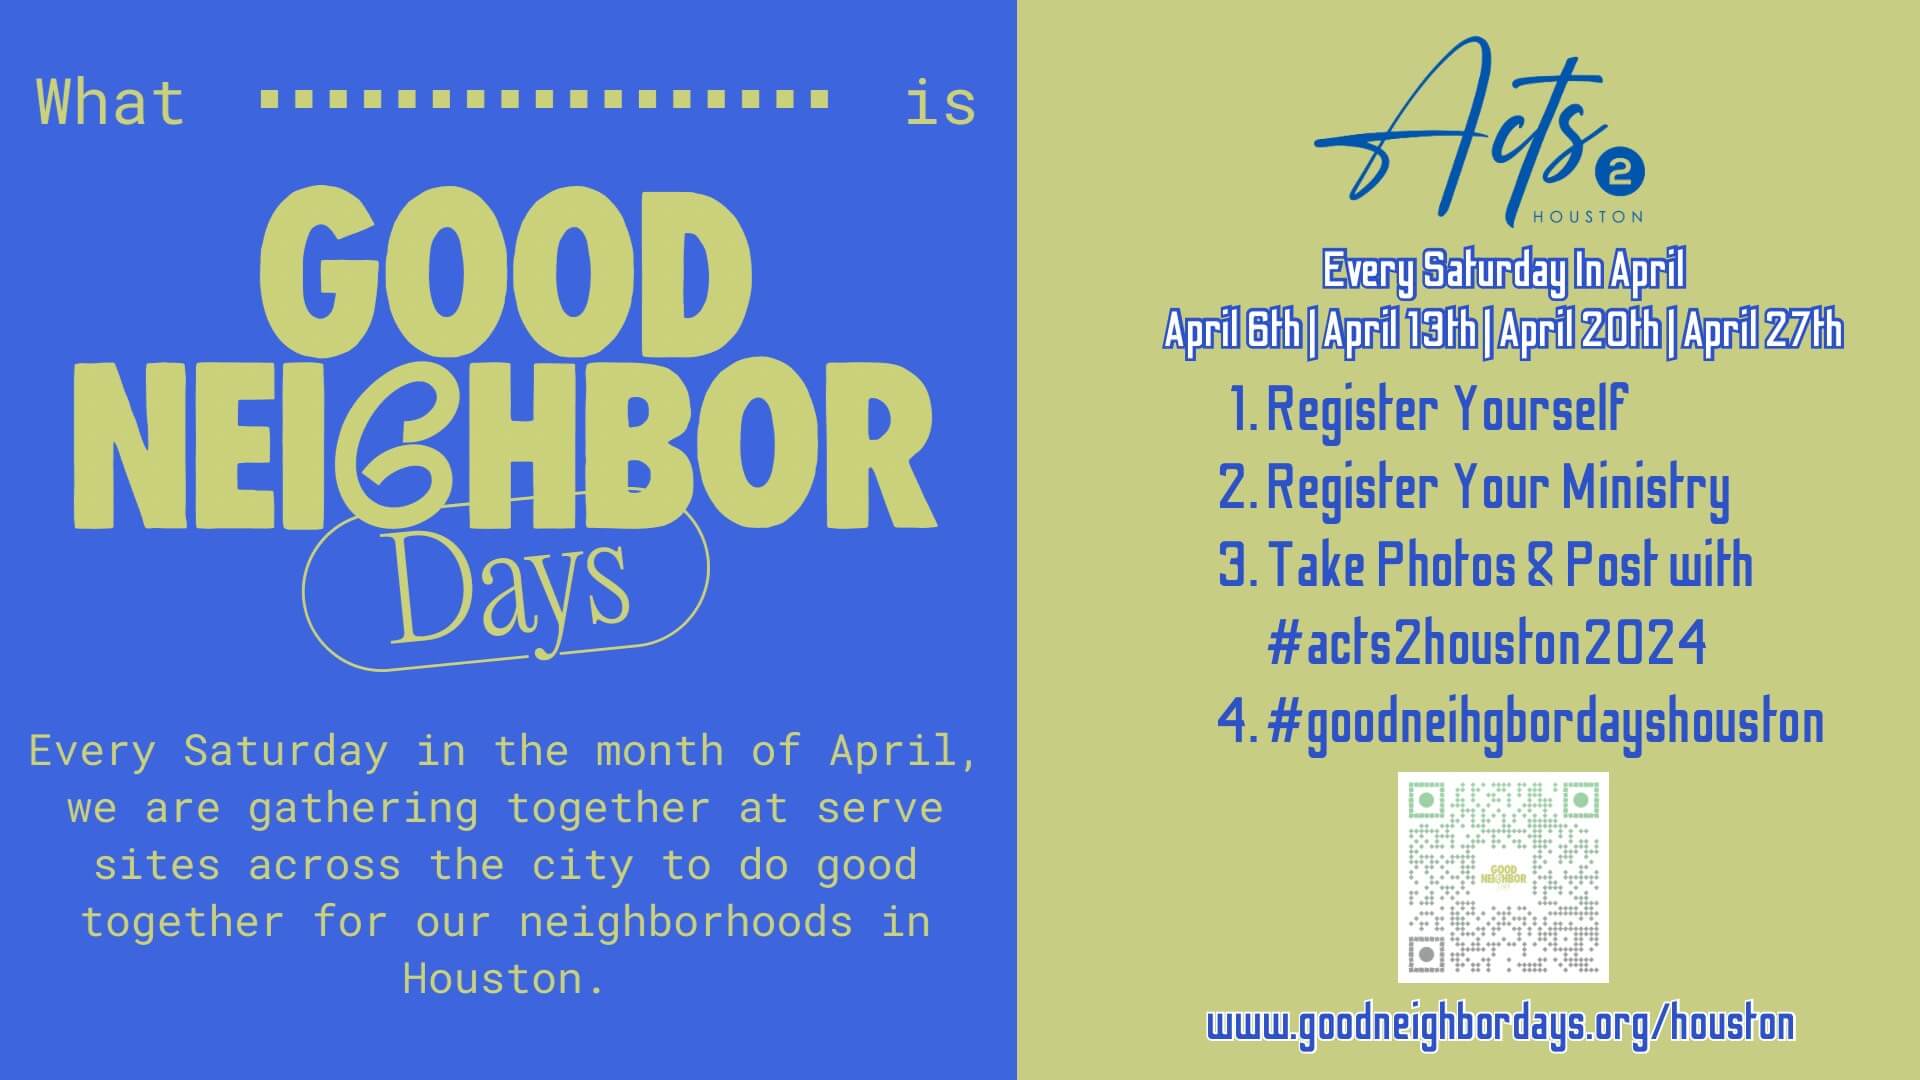 every saturday in april we gather to do good for our neighbors. register yourself and your ministry, take photos and post with #acts2houston2024